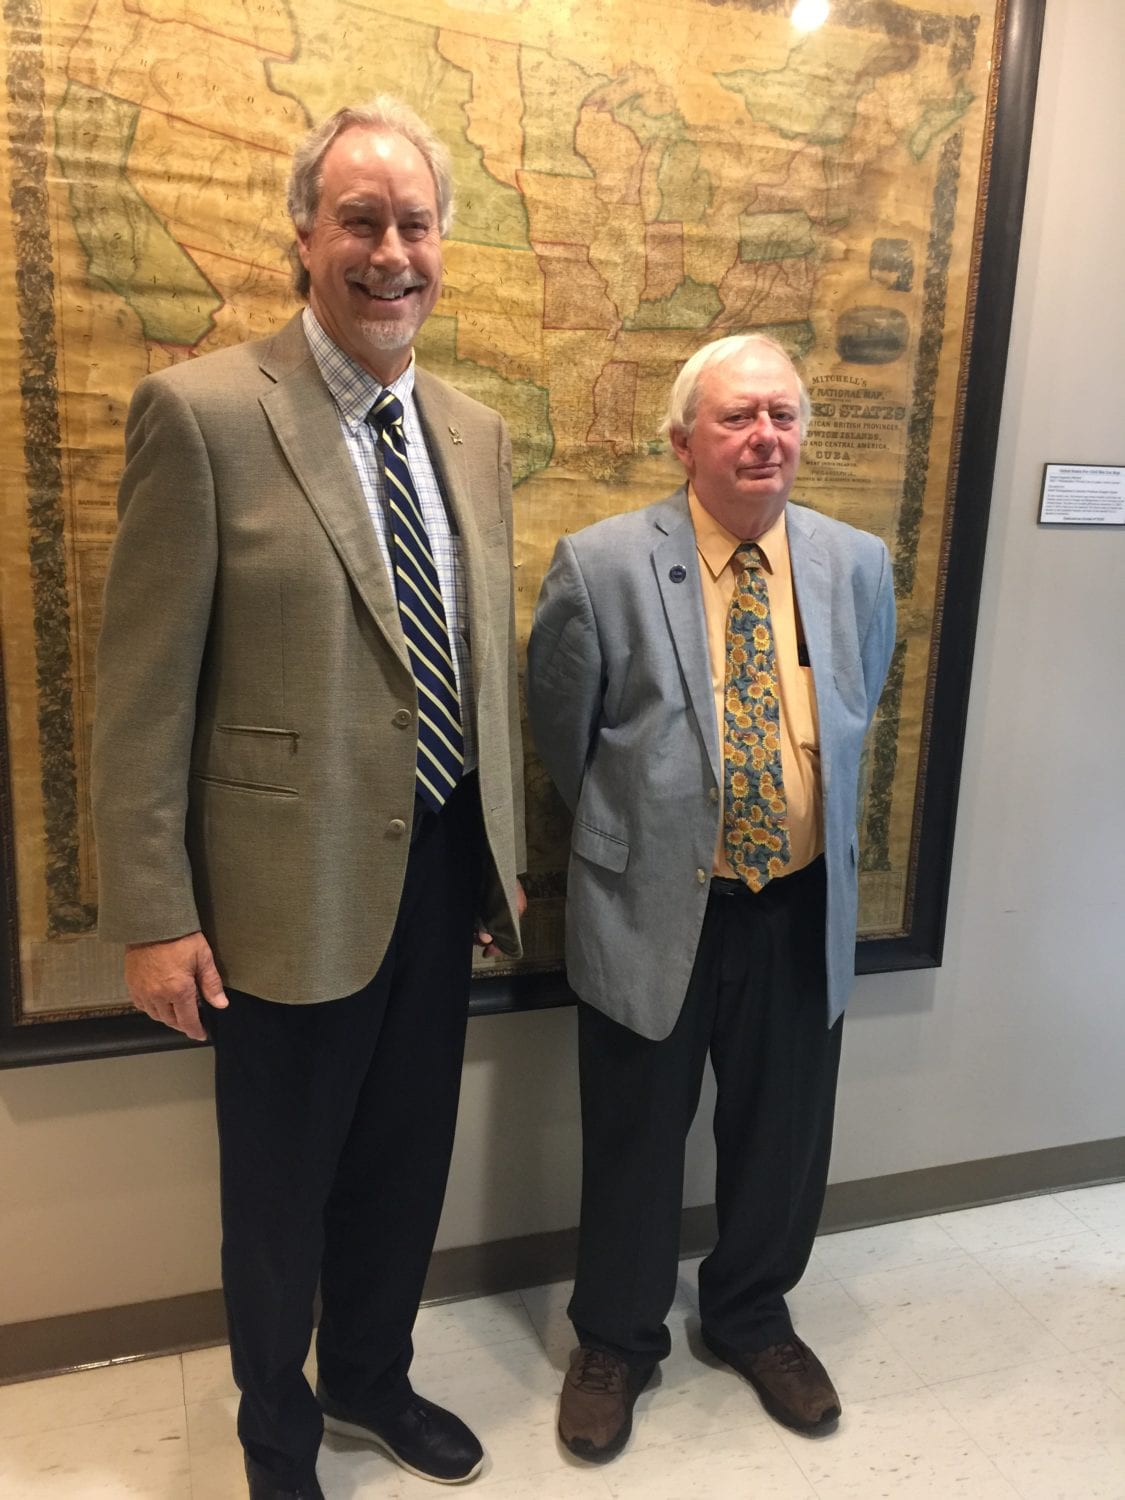 A glimpse of the past: SUNY Broome honors professor for donation of historic map